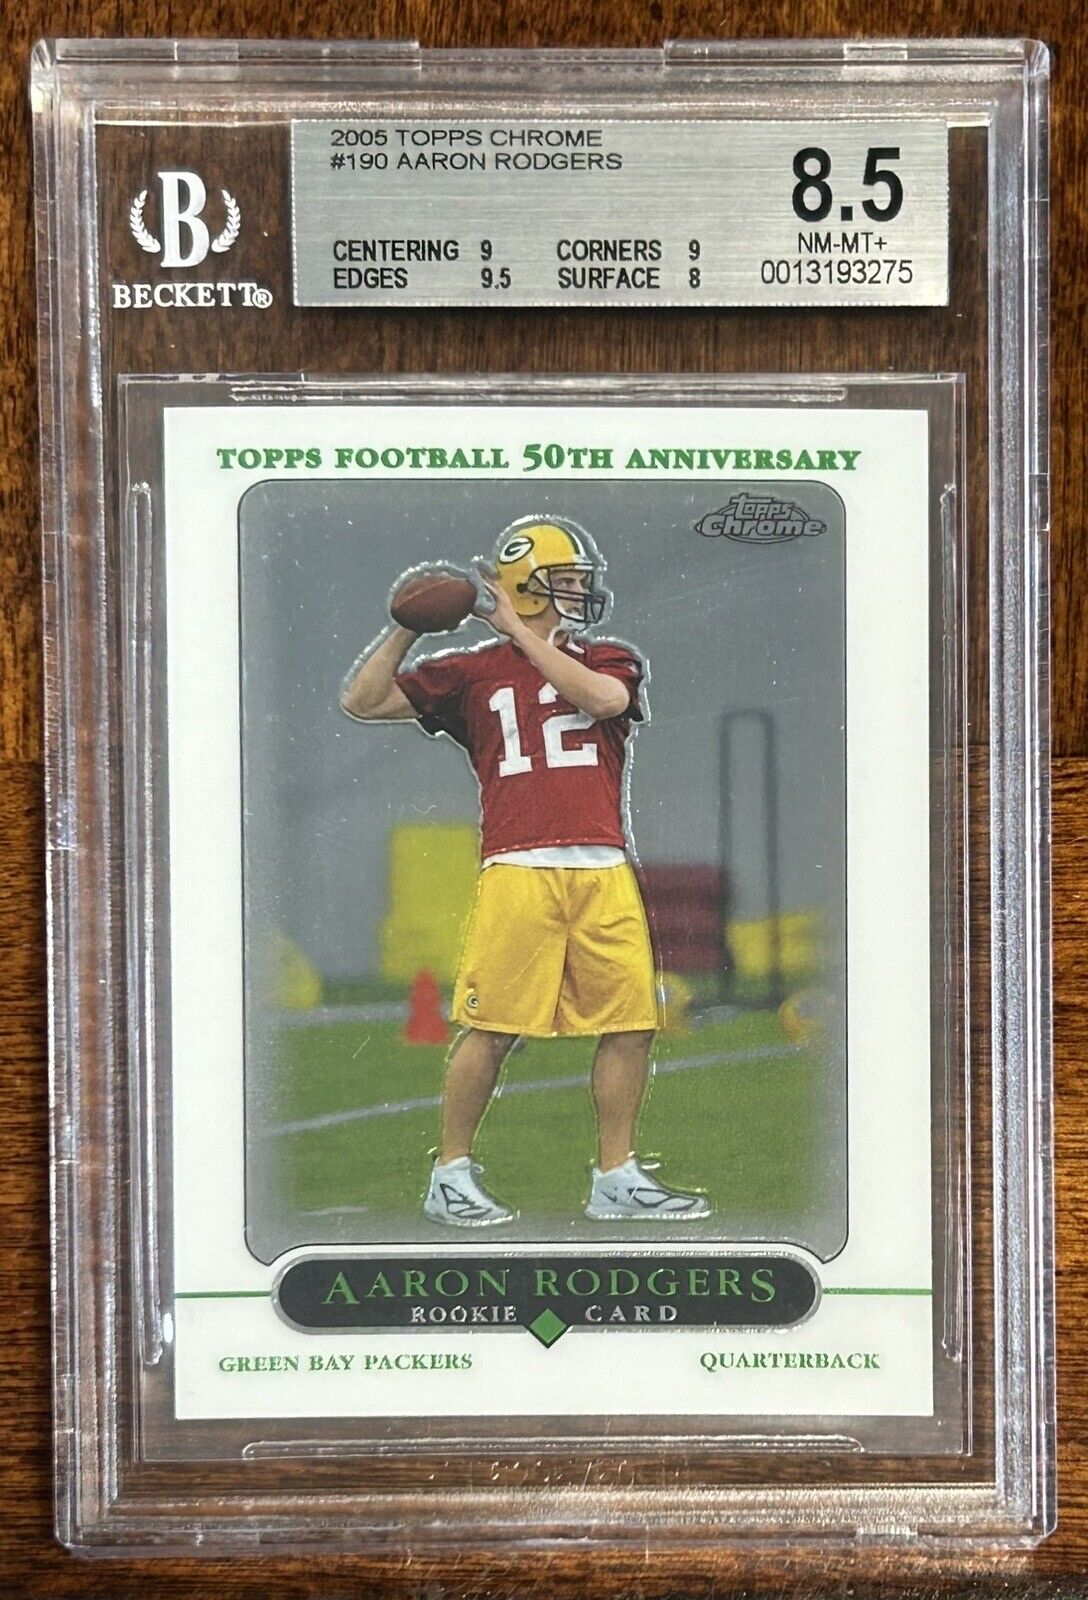 2005 Topps Chrome Aaron Rodgers BGS 8.5 (9, 9.5, 9, 8) Rookie Card RC #190 NrMt+